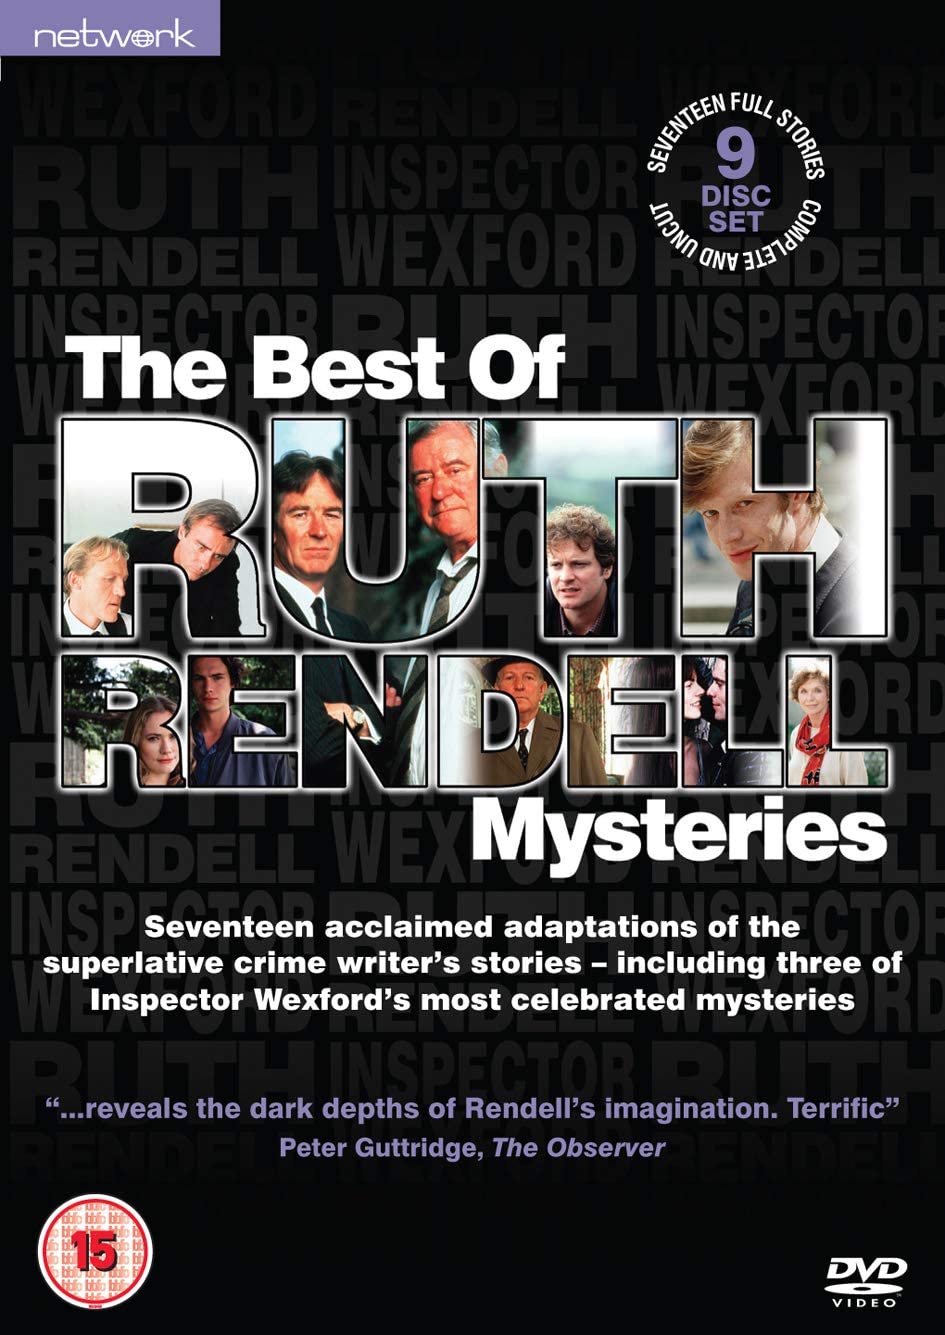 The Best Of The Ruth Rendell Mysteries [DVD]